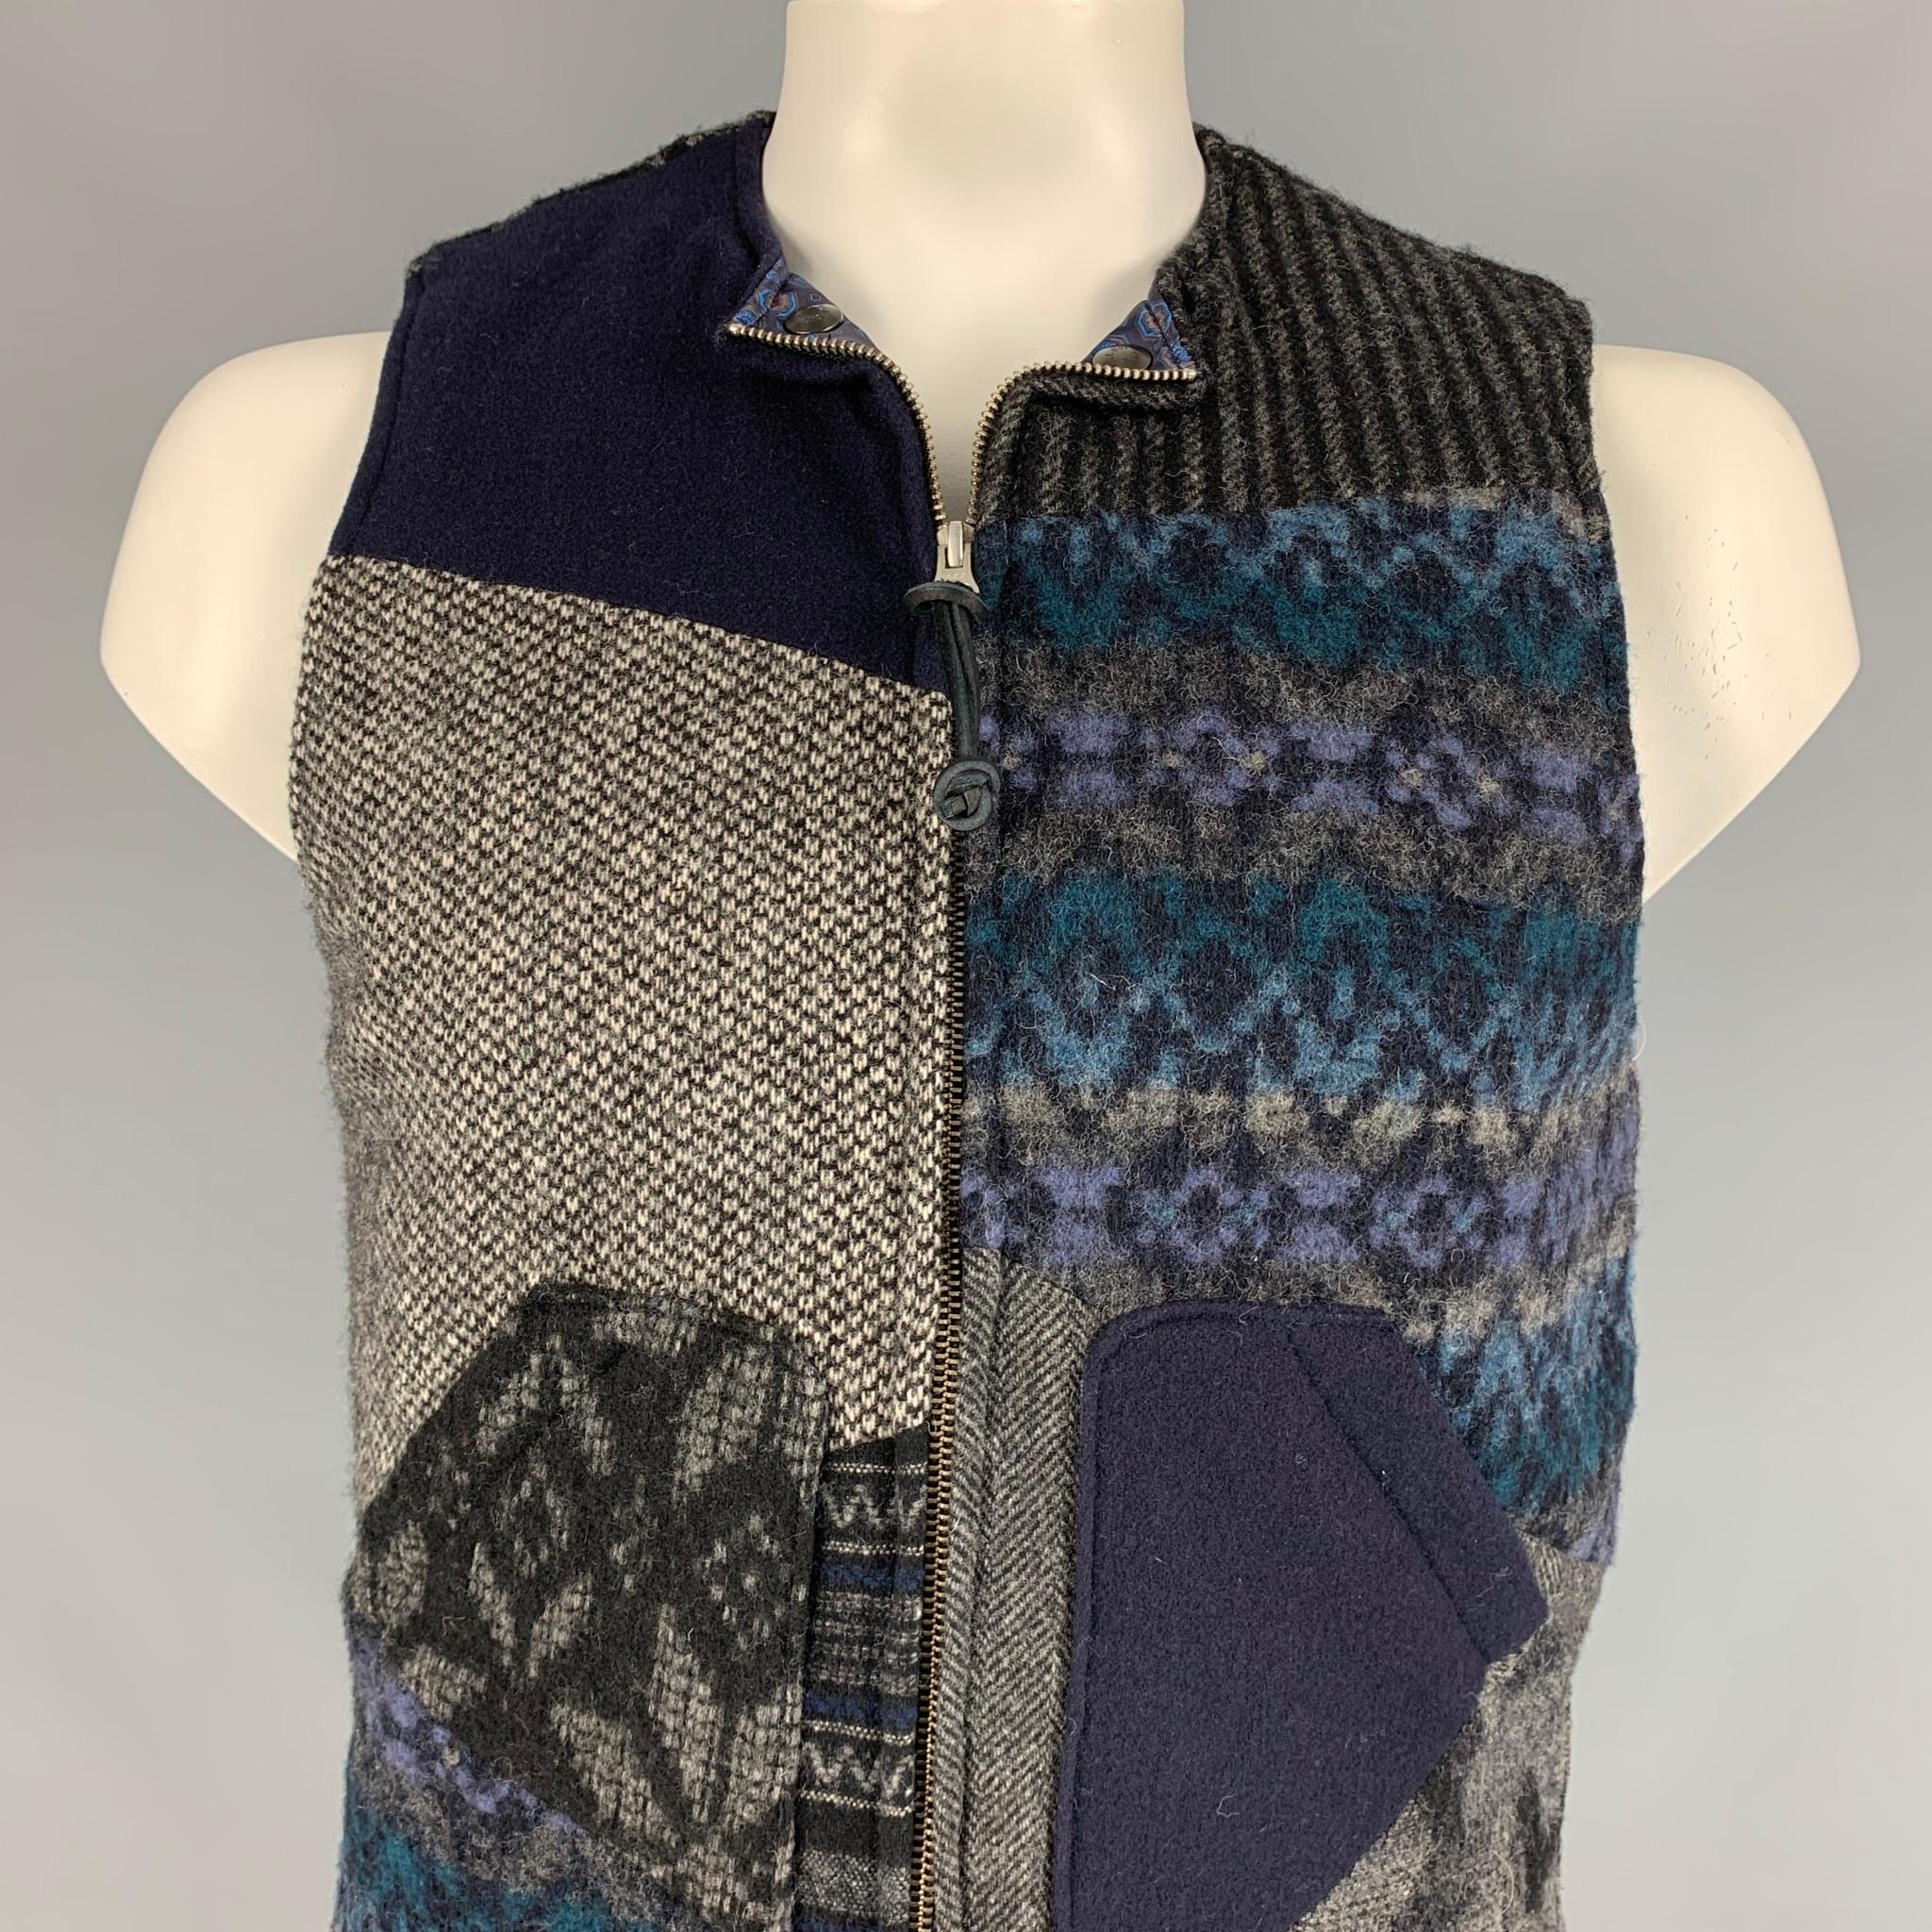 MONITALY vest comes in a navy & grey patchwork wool blend with a full liner featuring snap button details, patch pockets, and a full zip up closure. Made in USA. 

Very Good Pre-Owned Condition.
Marked: 42

Measurements:

Shoulder: 15 in.
Chest: 42